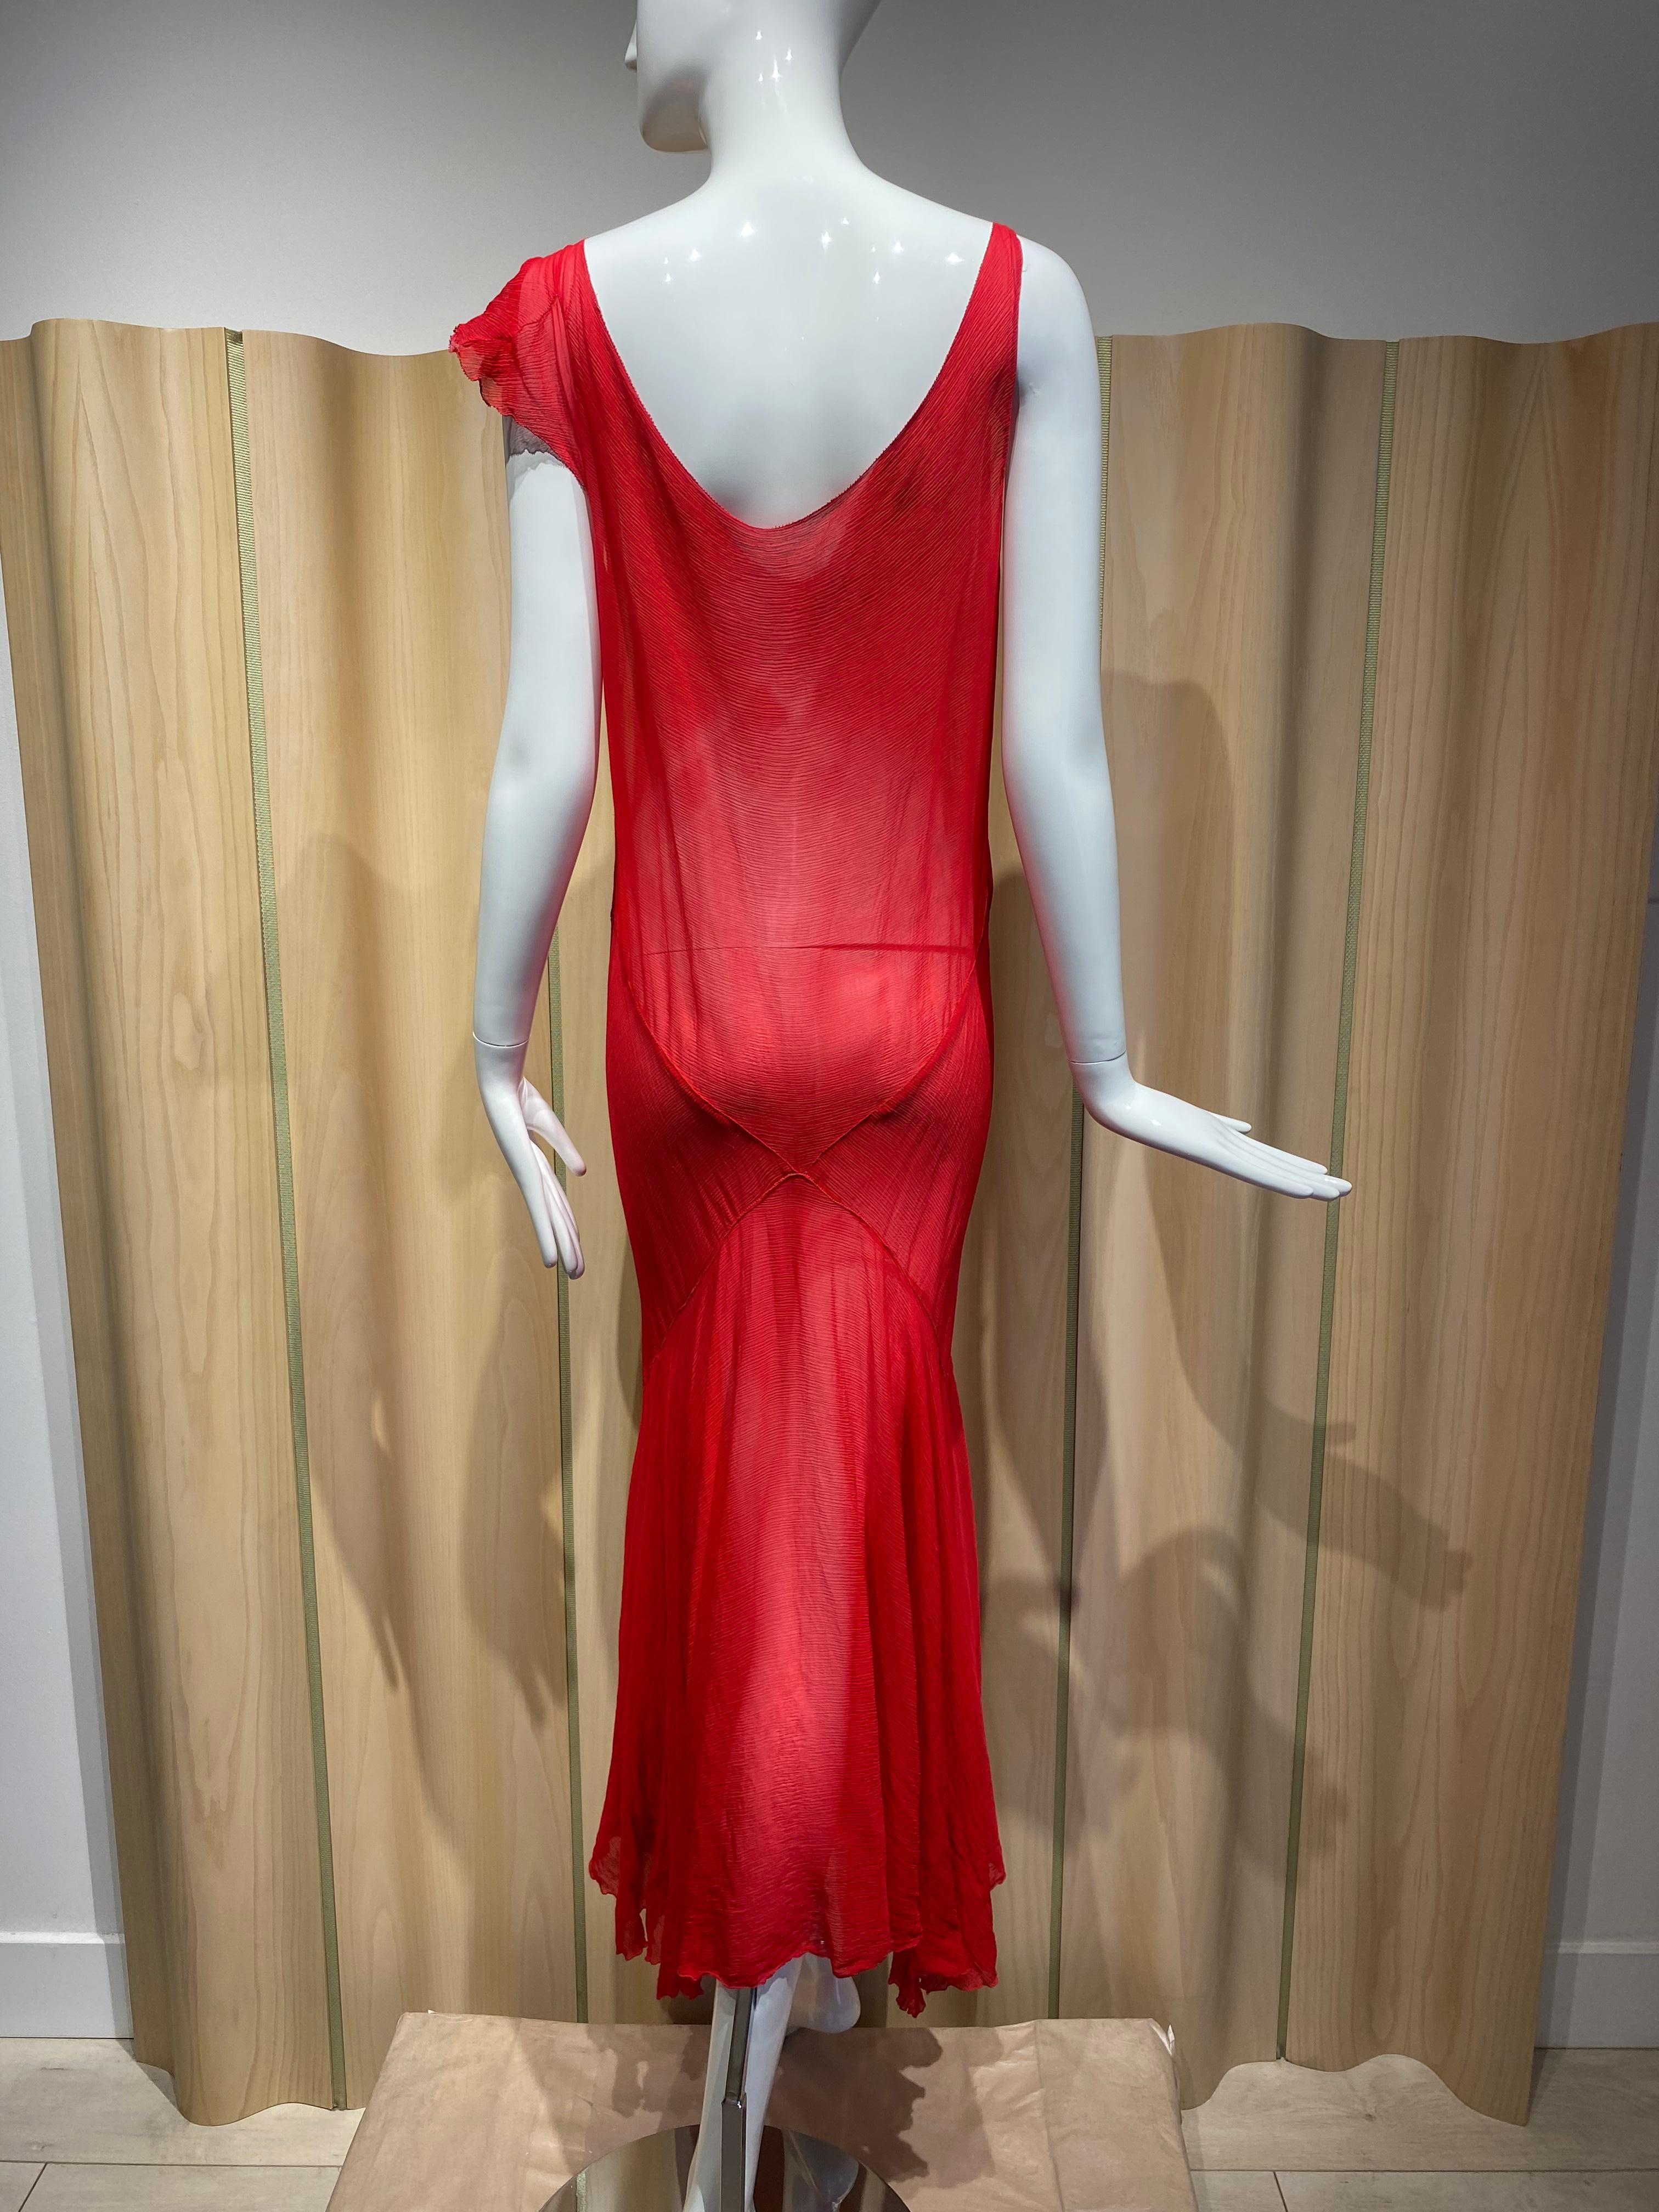 1930s Red Silk crepe sleeveless V neck sheer gown.
- Bias cut
Fit size 2/4/6